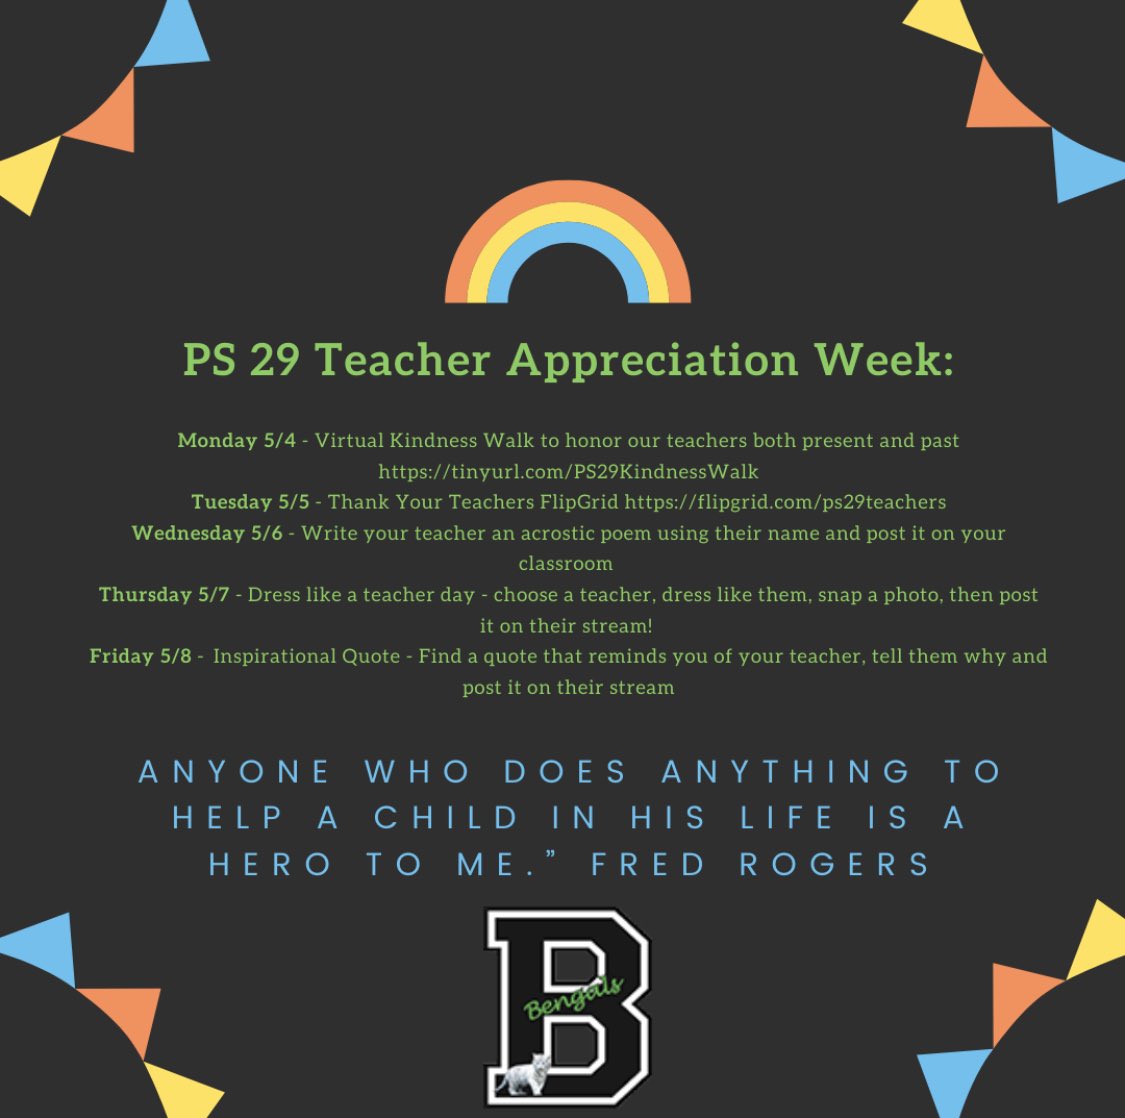 This week we celebrate some of our everyday heroes 💚⭐️💜⭐️ #thankateachernyc ☑️ Help us to thank our #PS29 teachers both present and past each day this week. #ThankYou #StaySafe